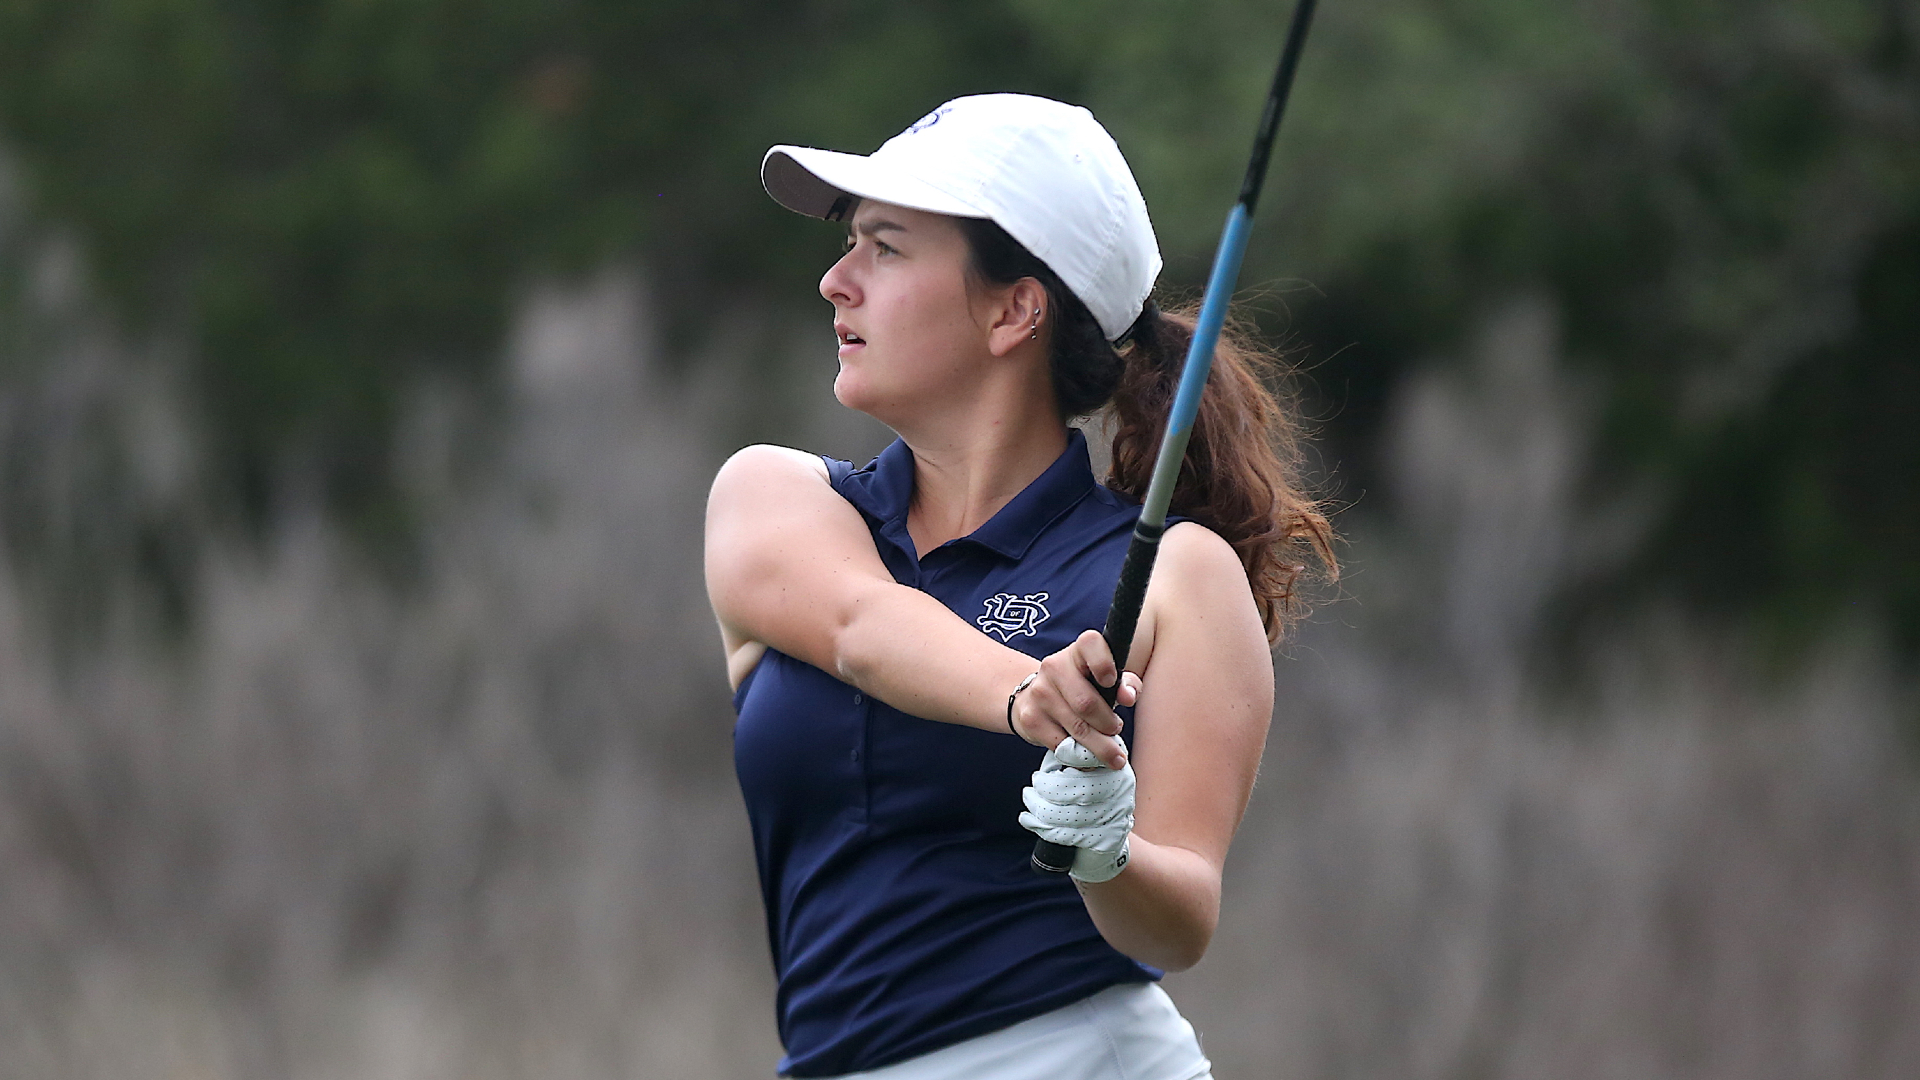 Trio of Crusaders Completed Round 1 of SCAC Championships